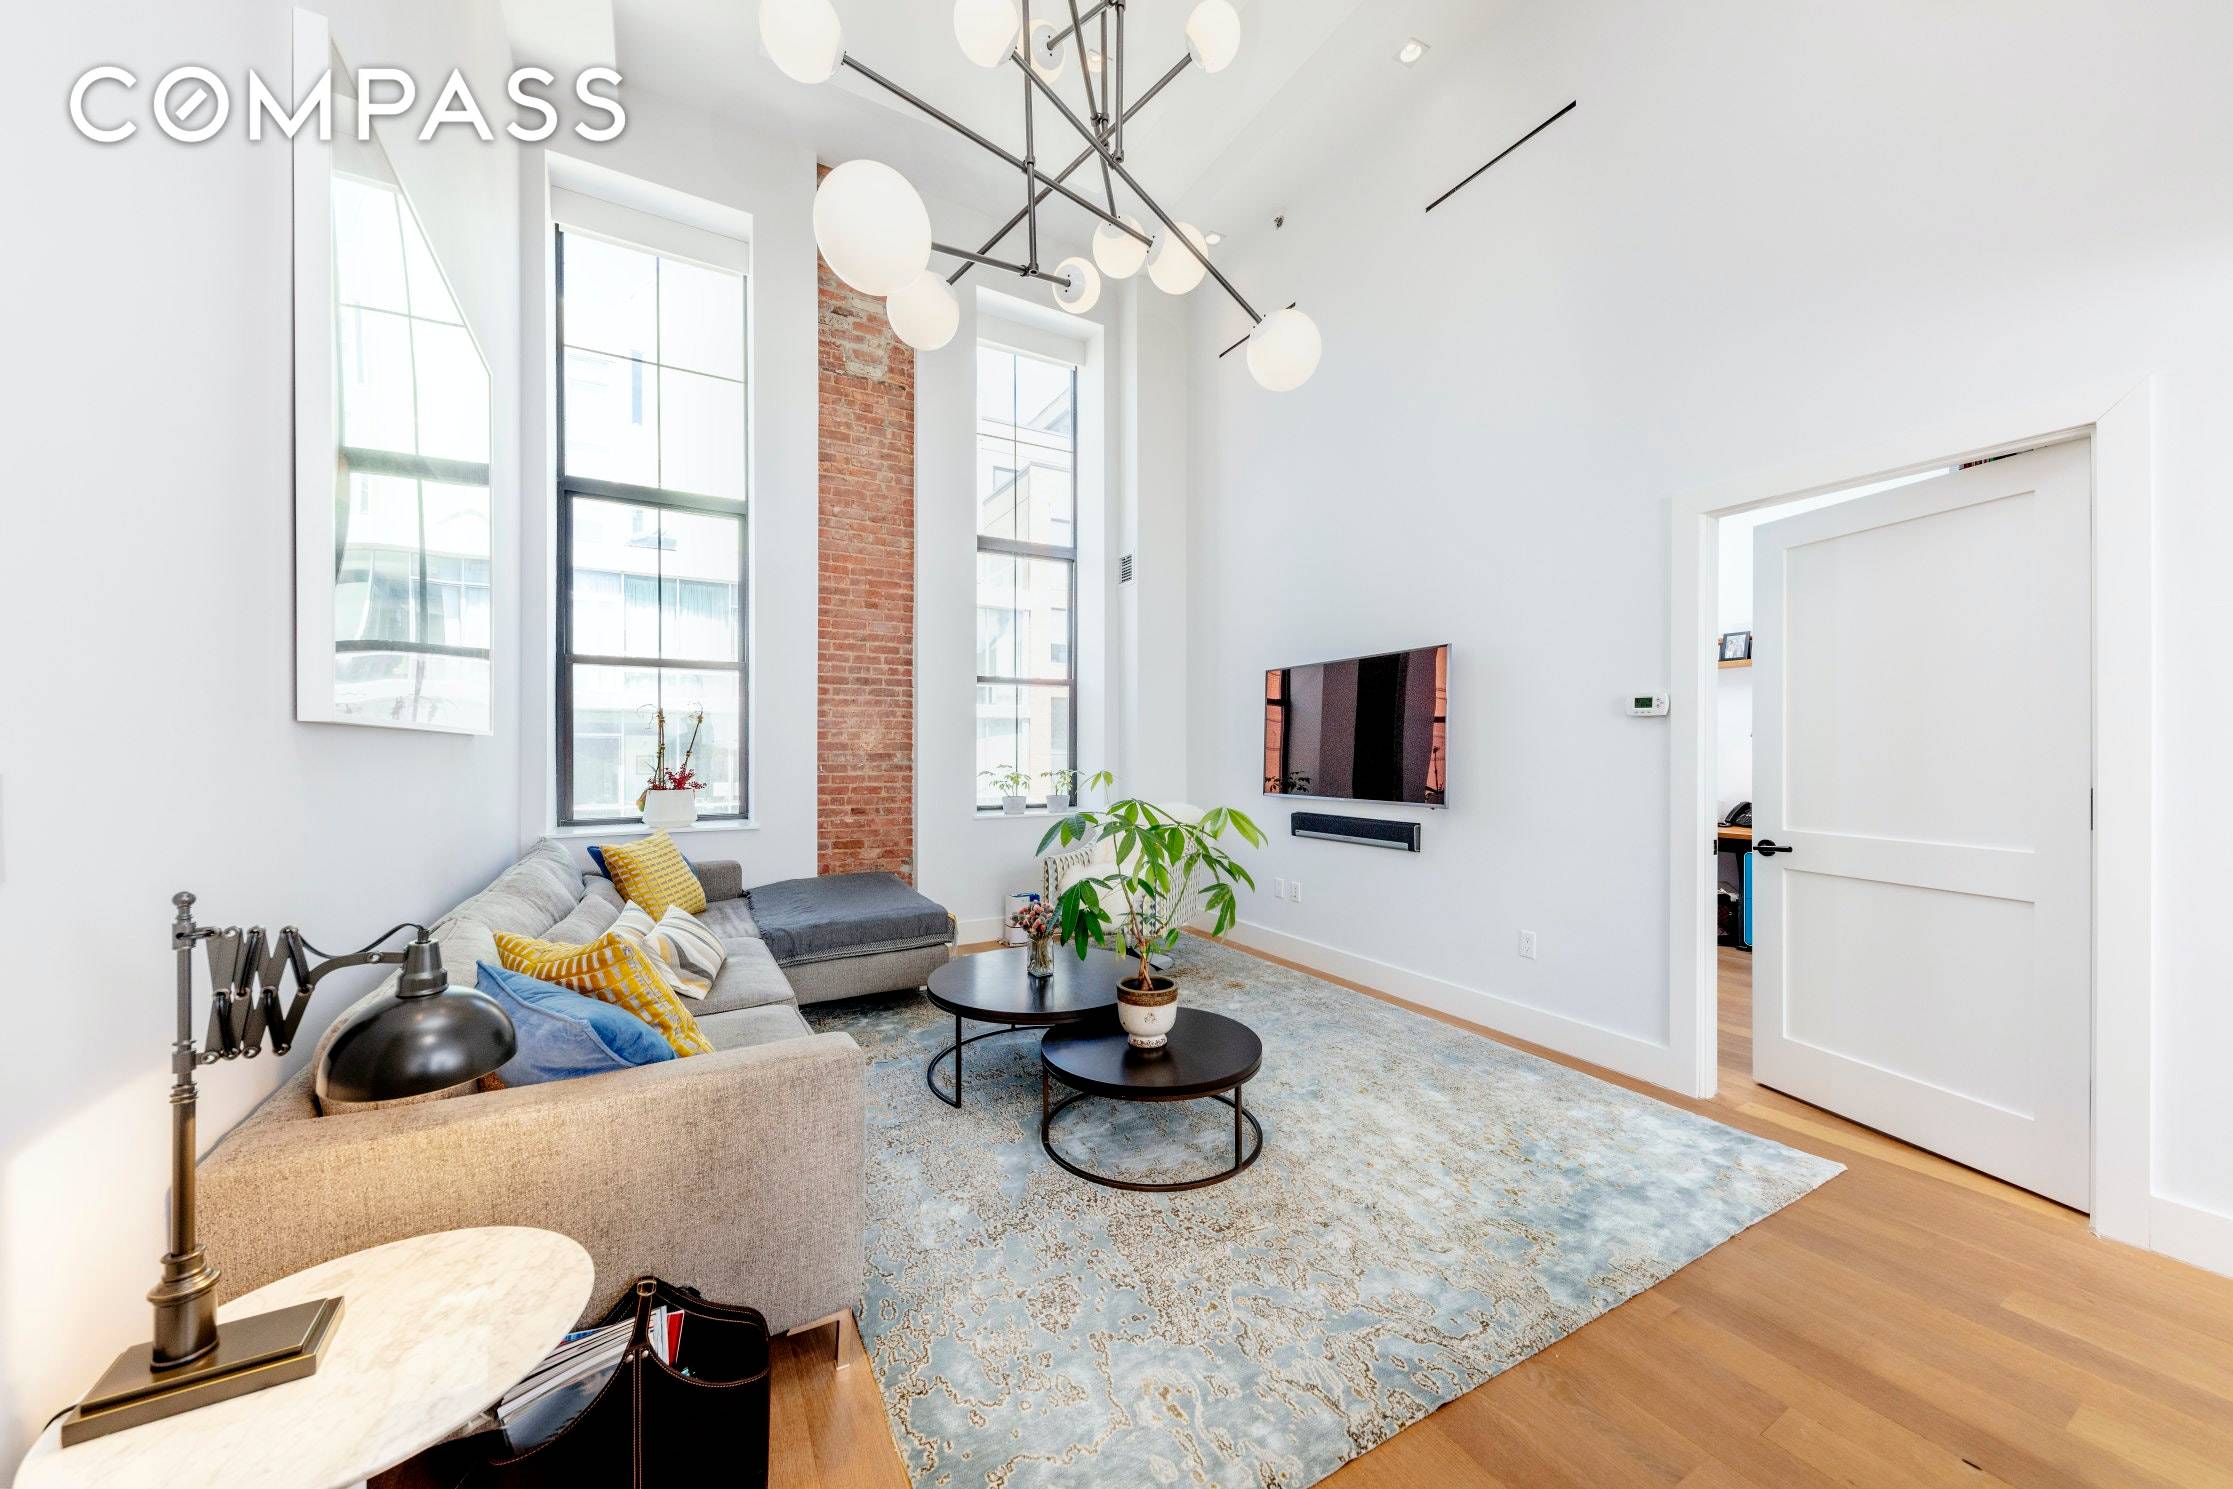 Spectacular Architecturally designed 3 bed, 3 bath duplex apartment situated in this beautiful loft condo conversion of an old manufacturing building.